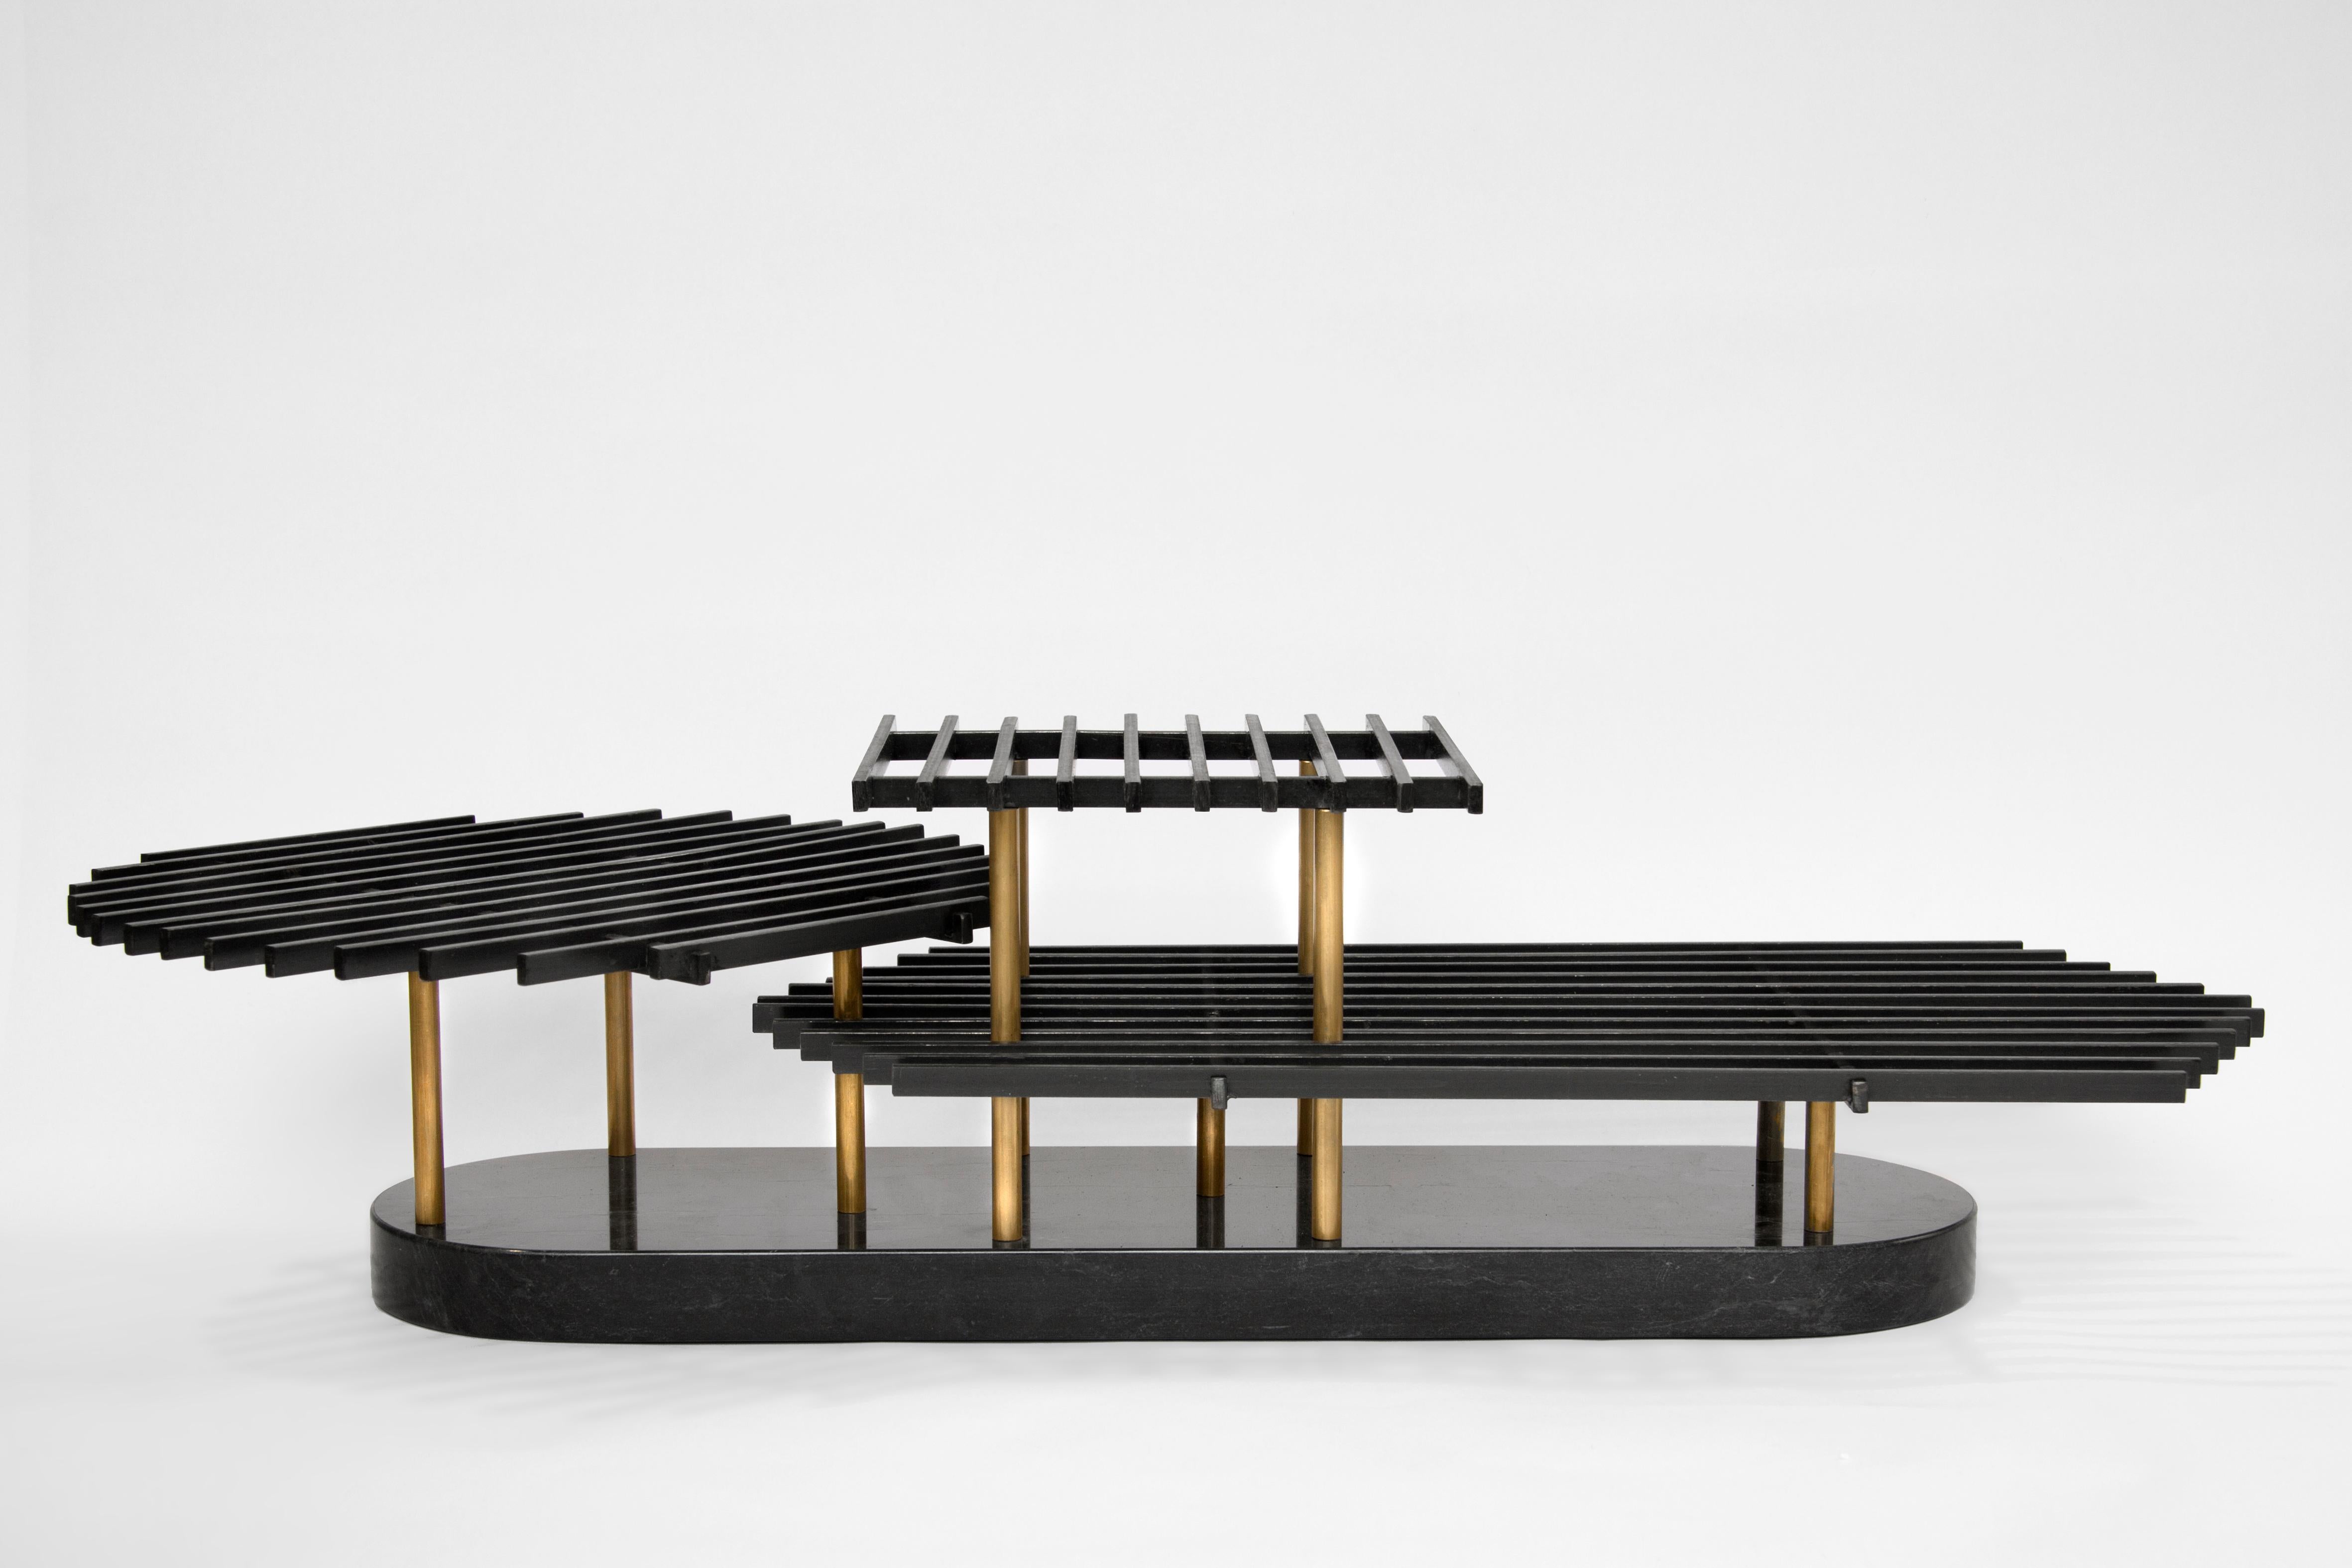 Saracinesca table podium by Oeuffice
Edition: 12 + 2AP
2013
Dimensions: 75 x 32 x 19 cm
Materials: Black oxide steel, solid brass and black marble of ormea.

An overlapping collage of grids and planes inspired by the ornate detailing of